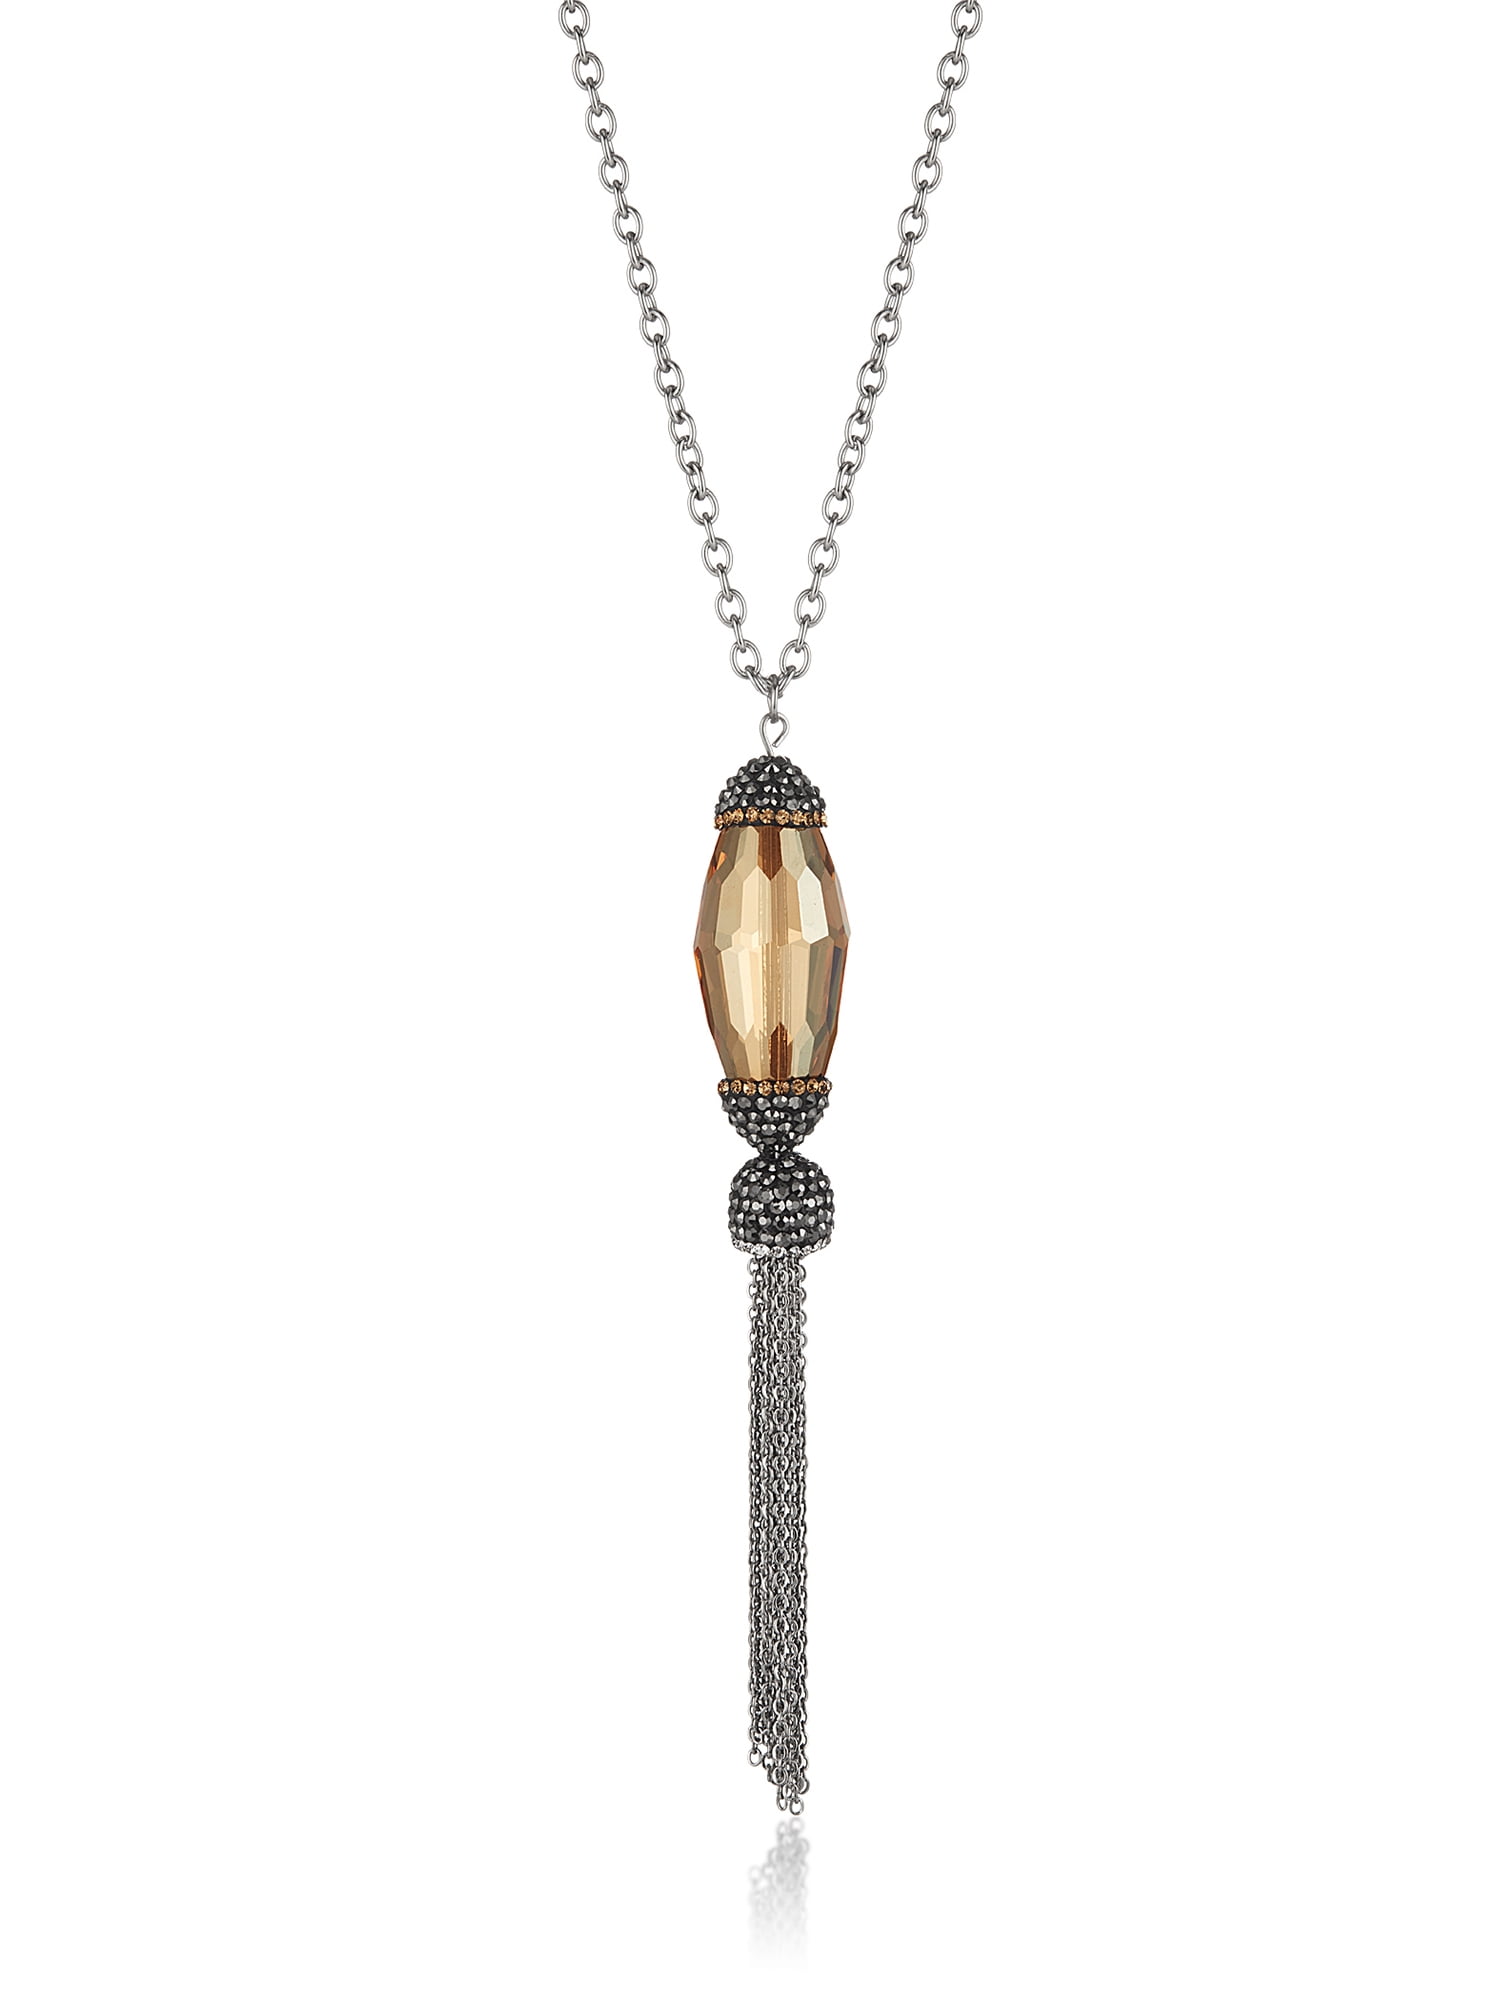 Details about   Long Silver Lariat Y Necklace with Cubic Zirconia Spike Pendant 